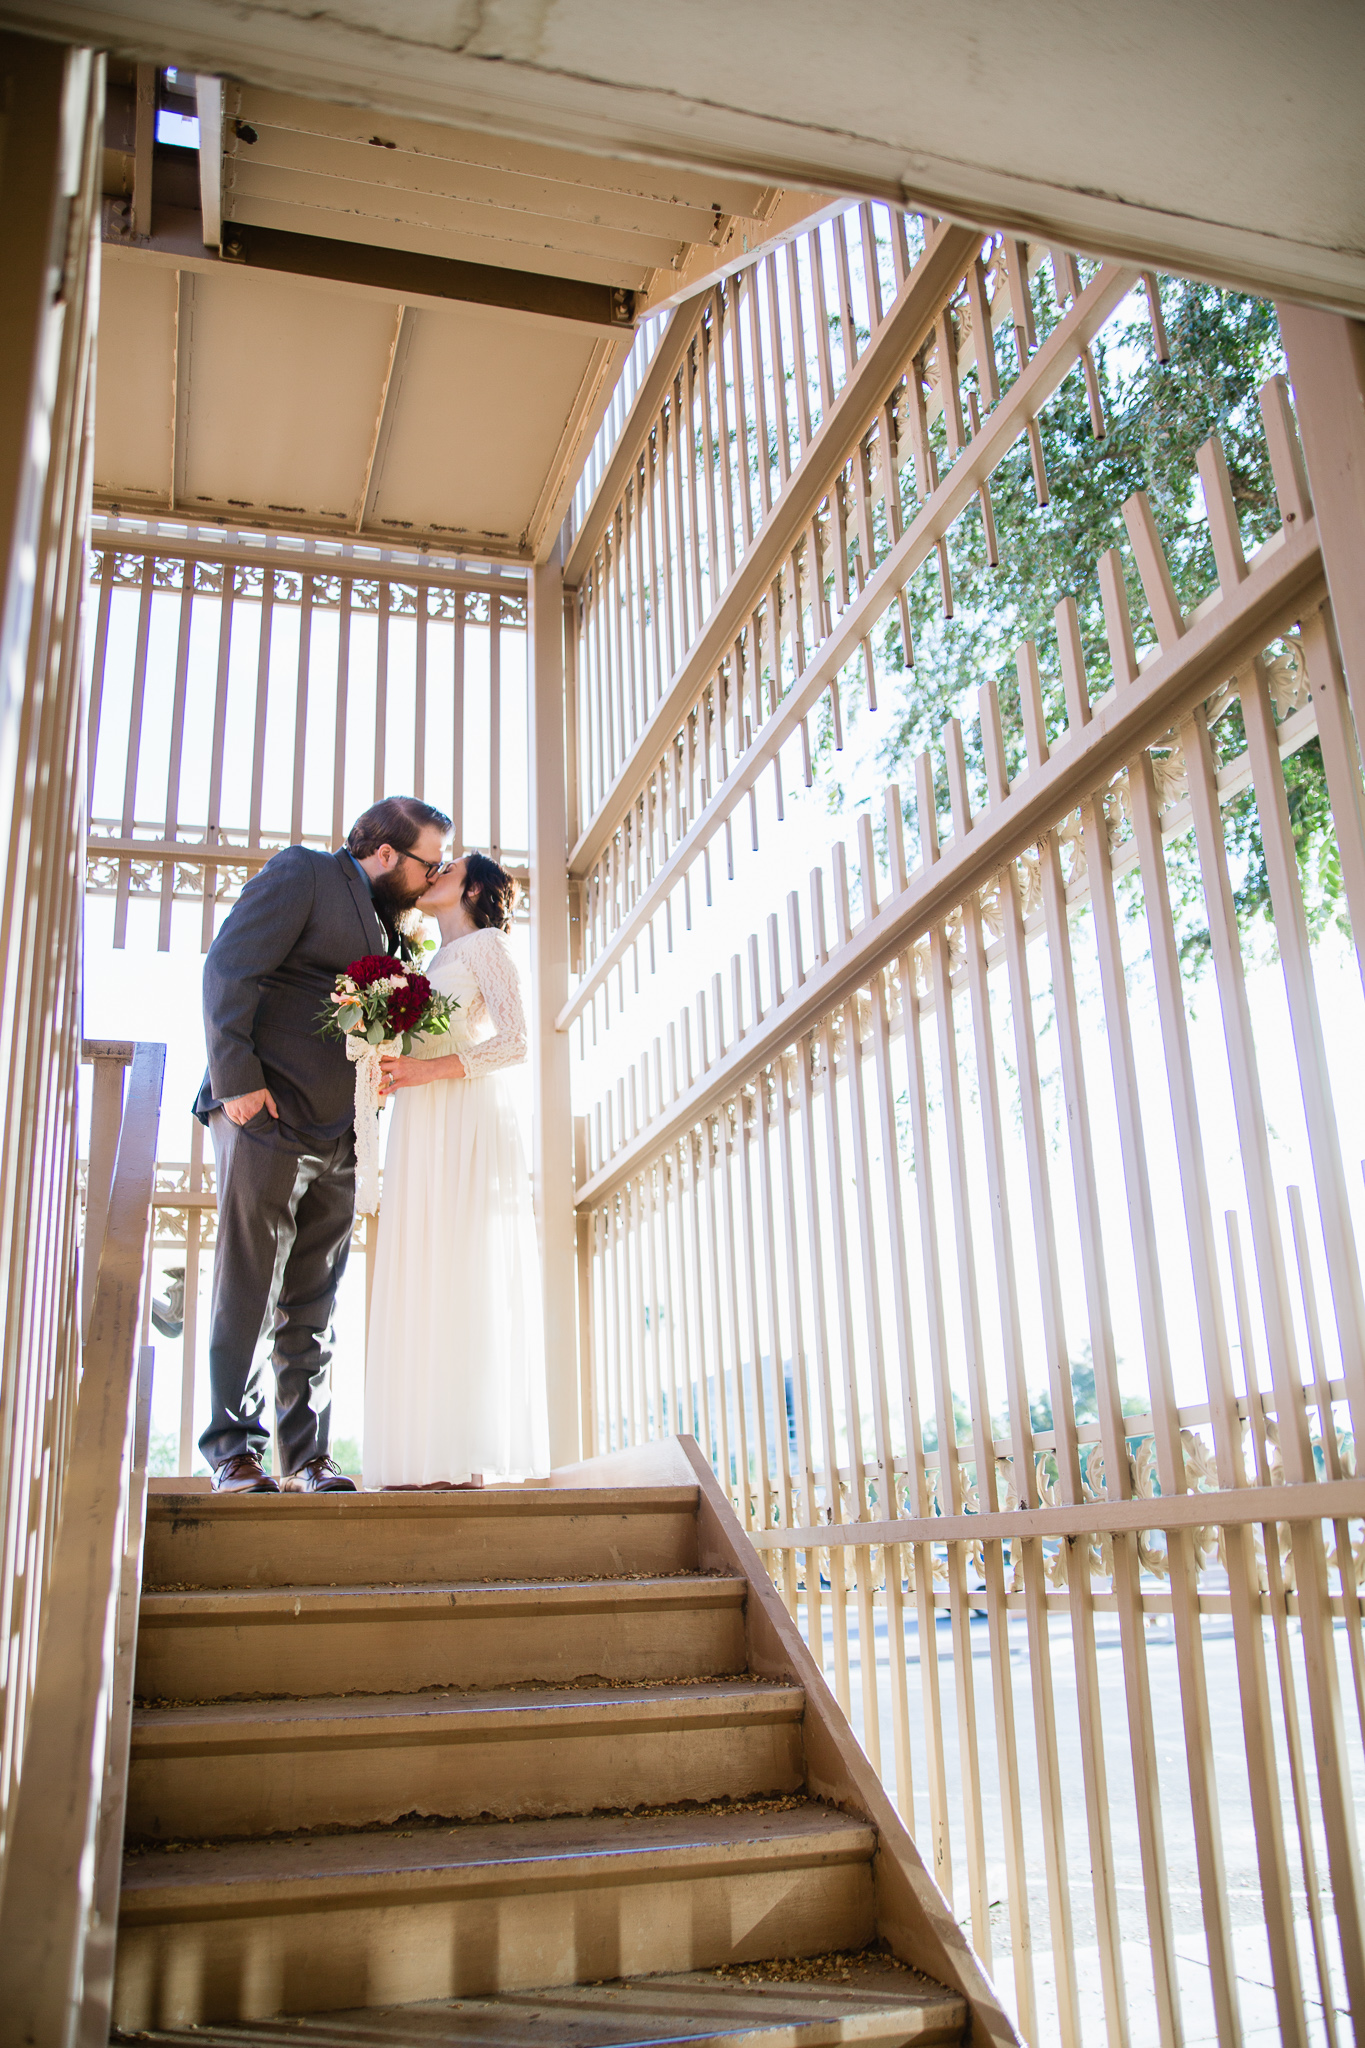 Vintage inspired bride and groom in stairwell for their burgundy and cream wedding in downtown Phoenix.